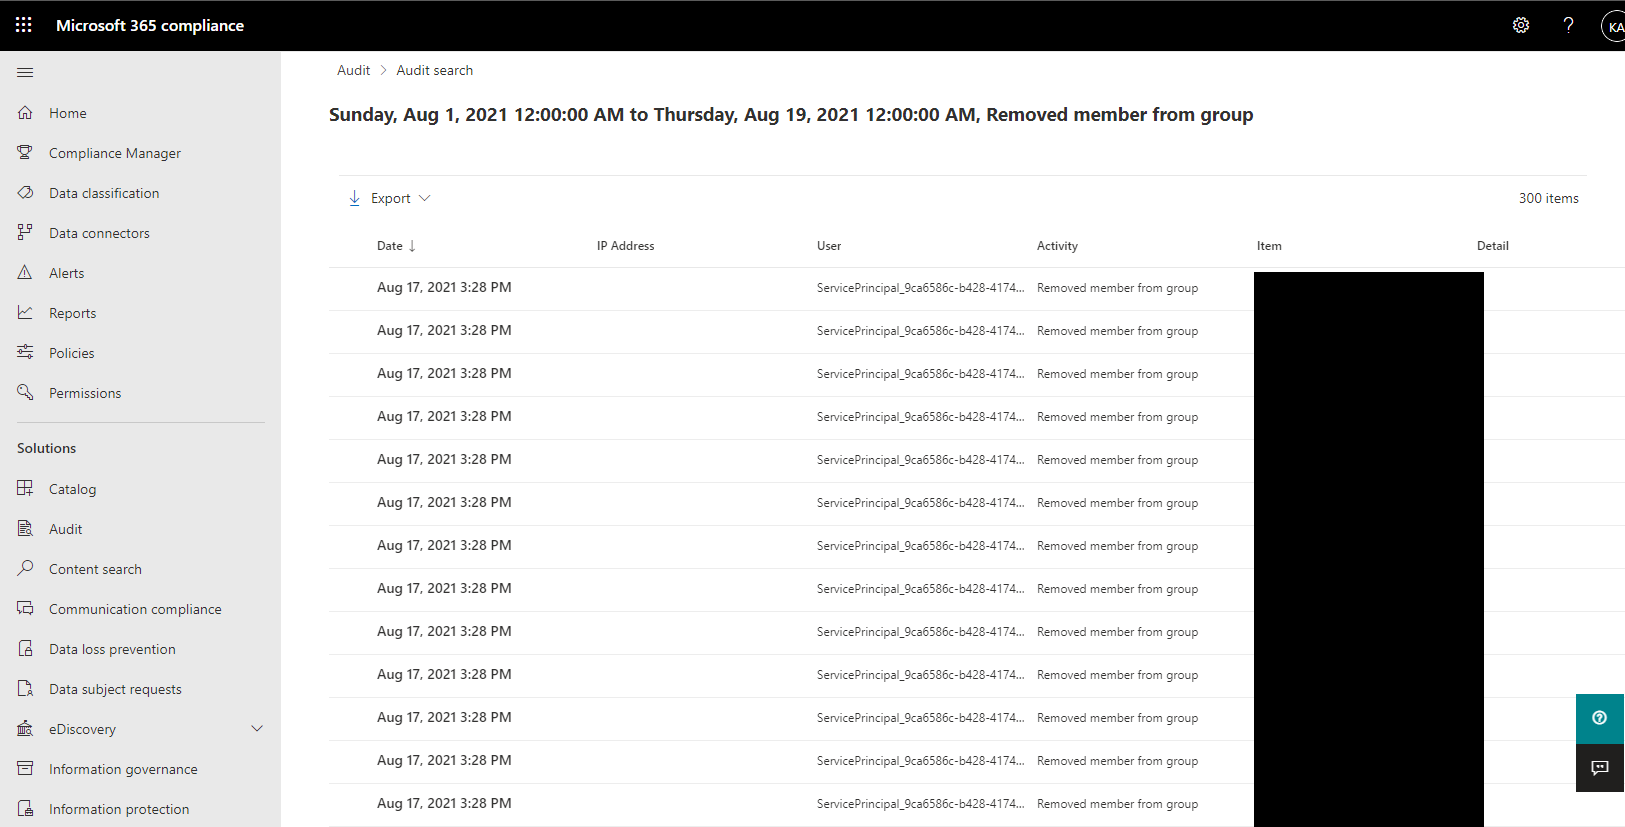 View of the Azure AD Audit log results